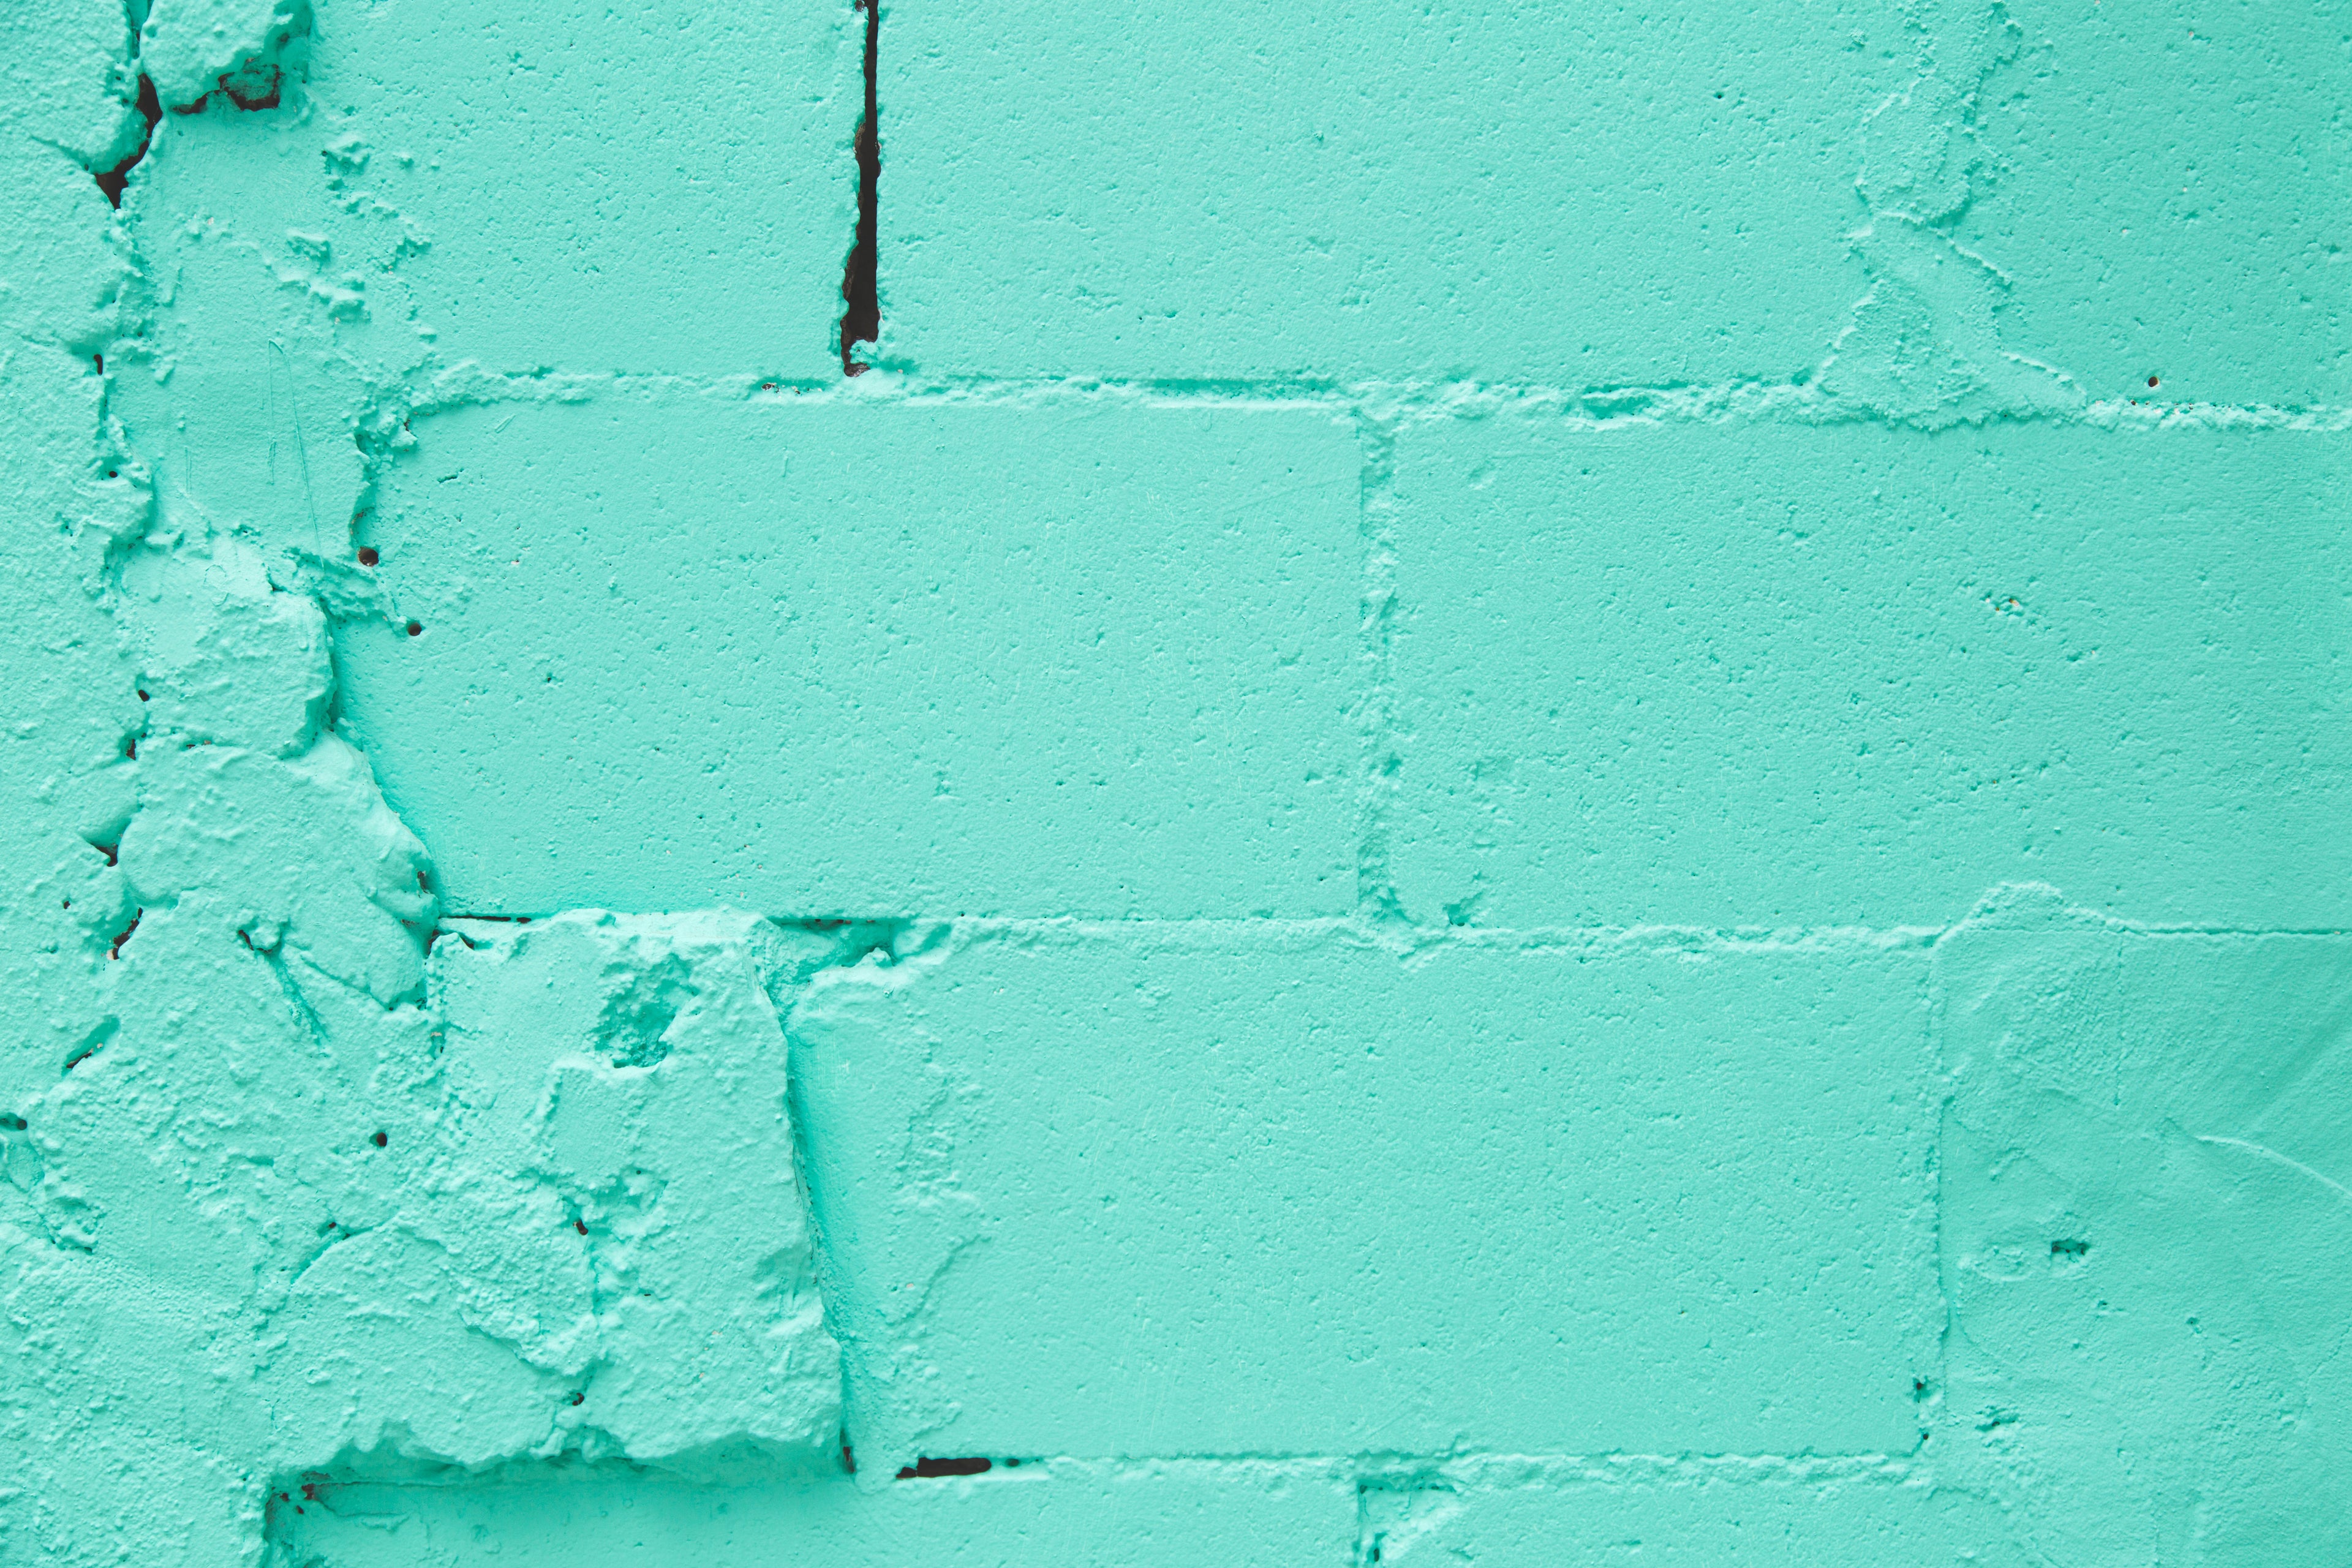 Turquoise brick wall image for shop news banner